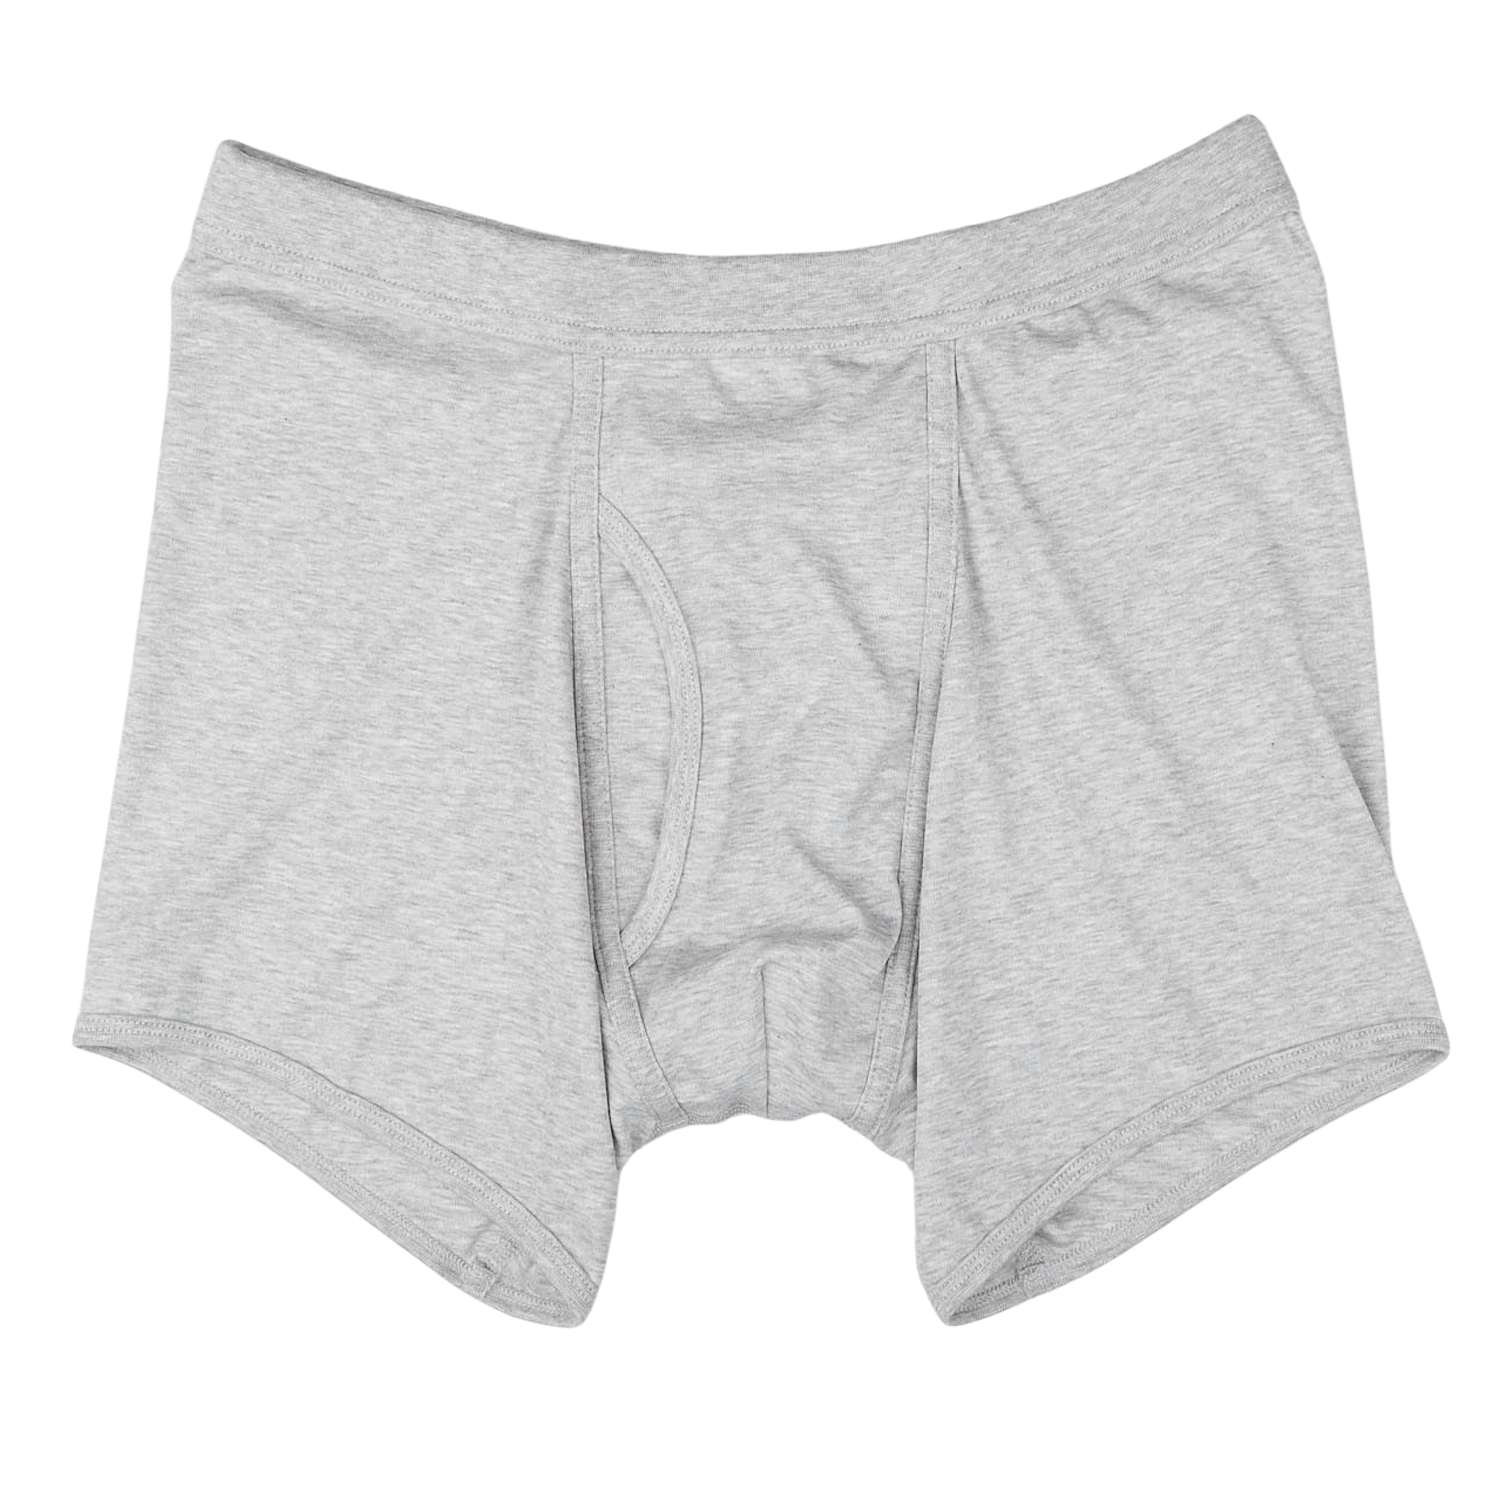 A pair of Grey Melange Pima Cotton Wil Trunks men's boxer briefs by The White Briefs, with a slight elastic waistband and defined seams, displayed on a white background.